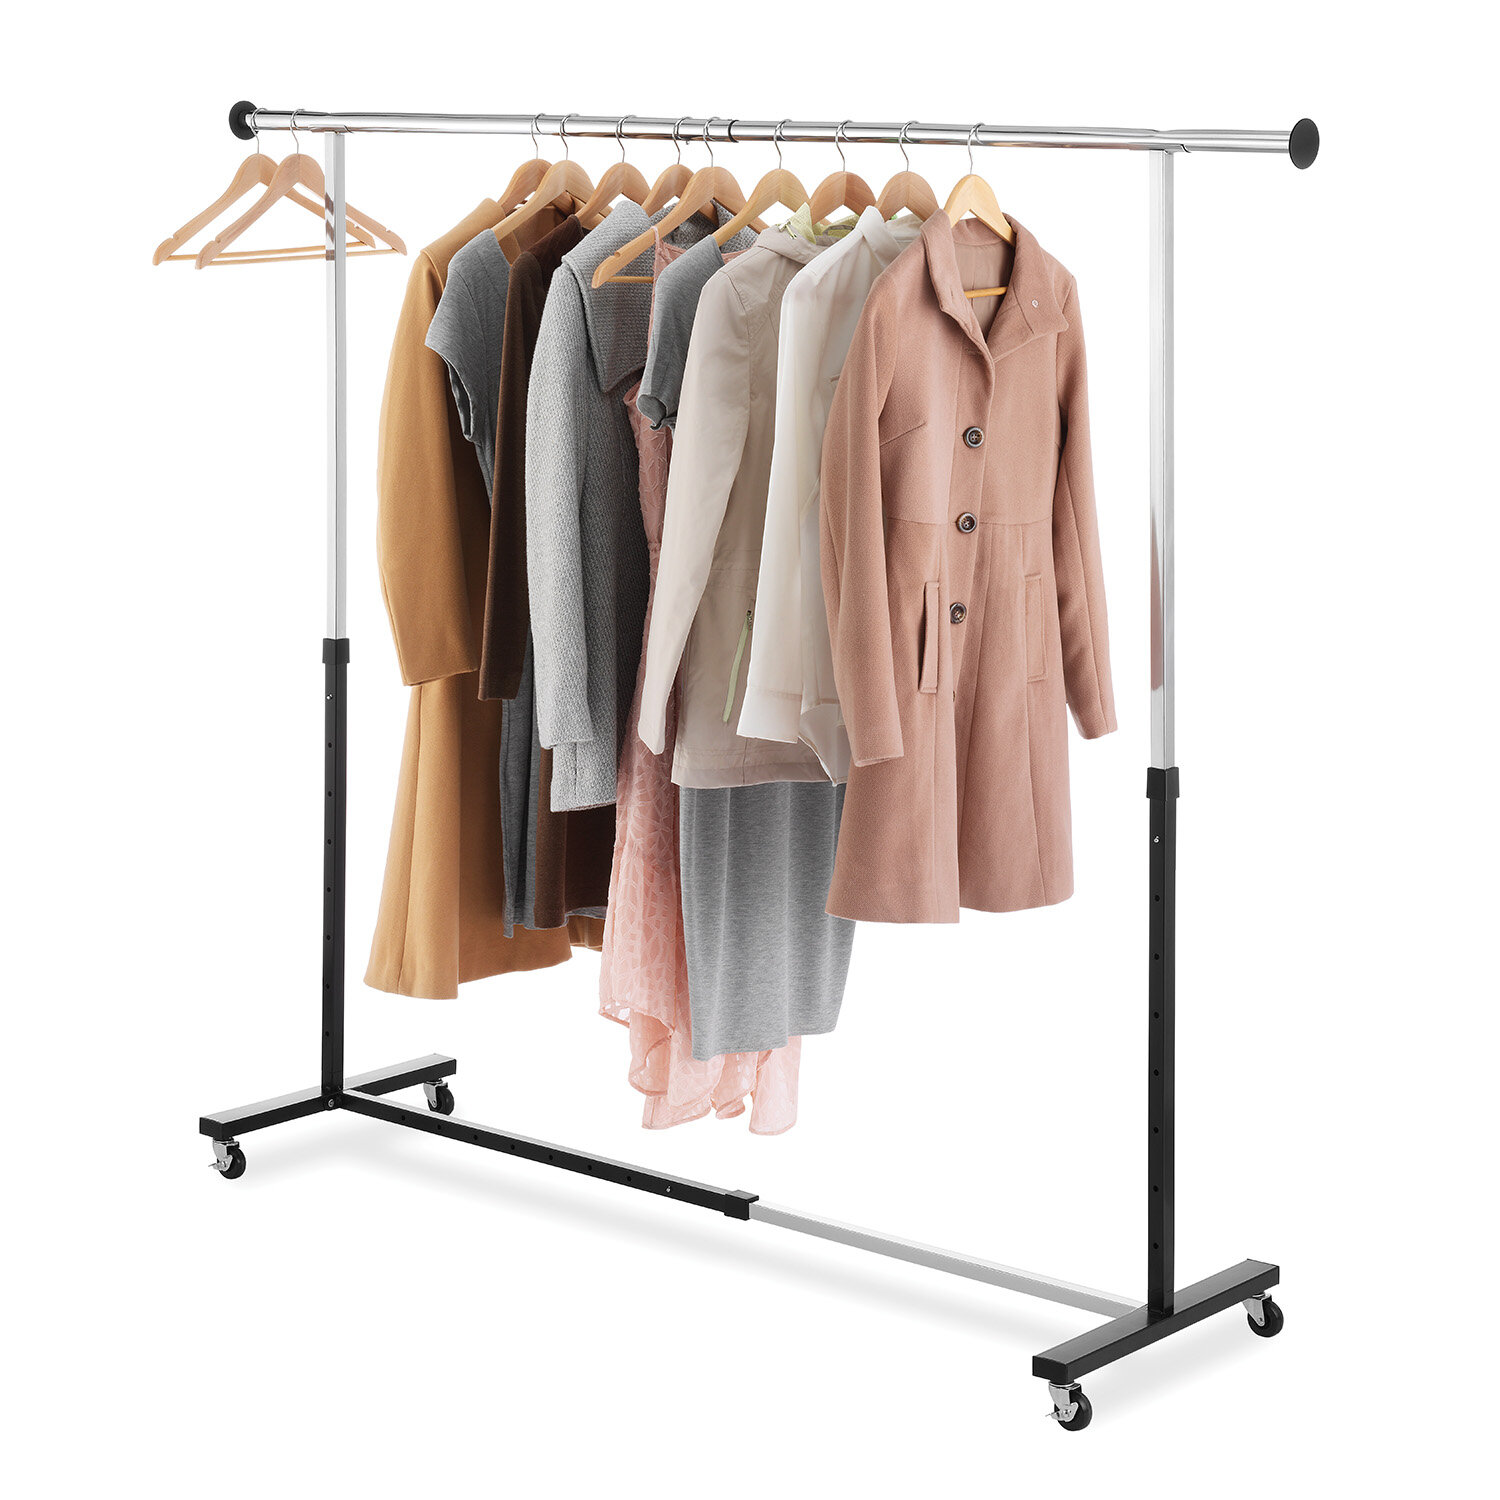 VEVOR Heavy Duty Clothes Rack Double Hanging Rod Clothing Garment Rack for Hanging Clothes Adjustable Height and Extendable Length Clothing Rack